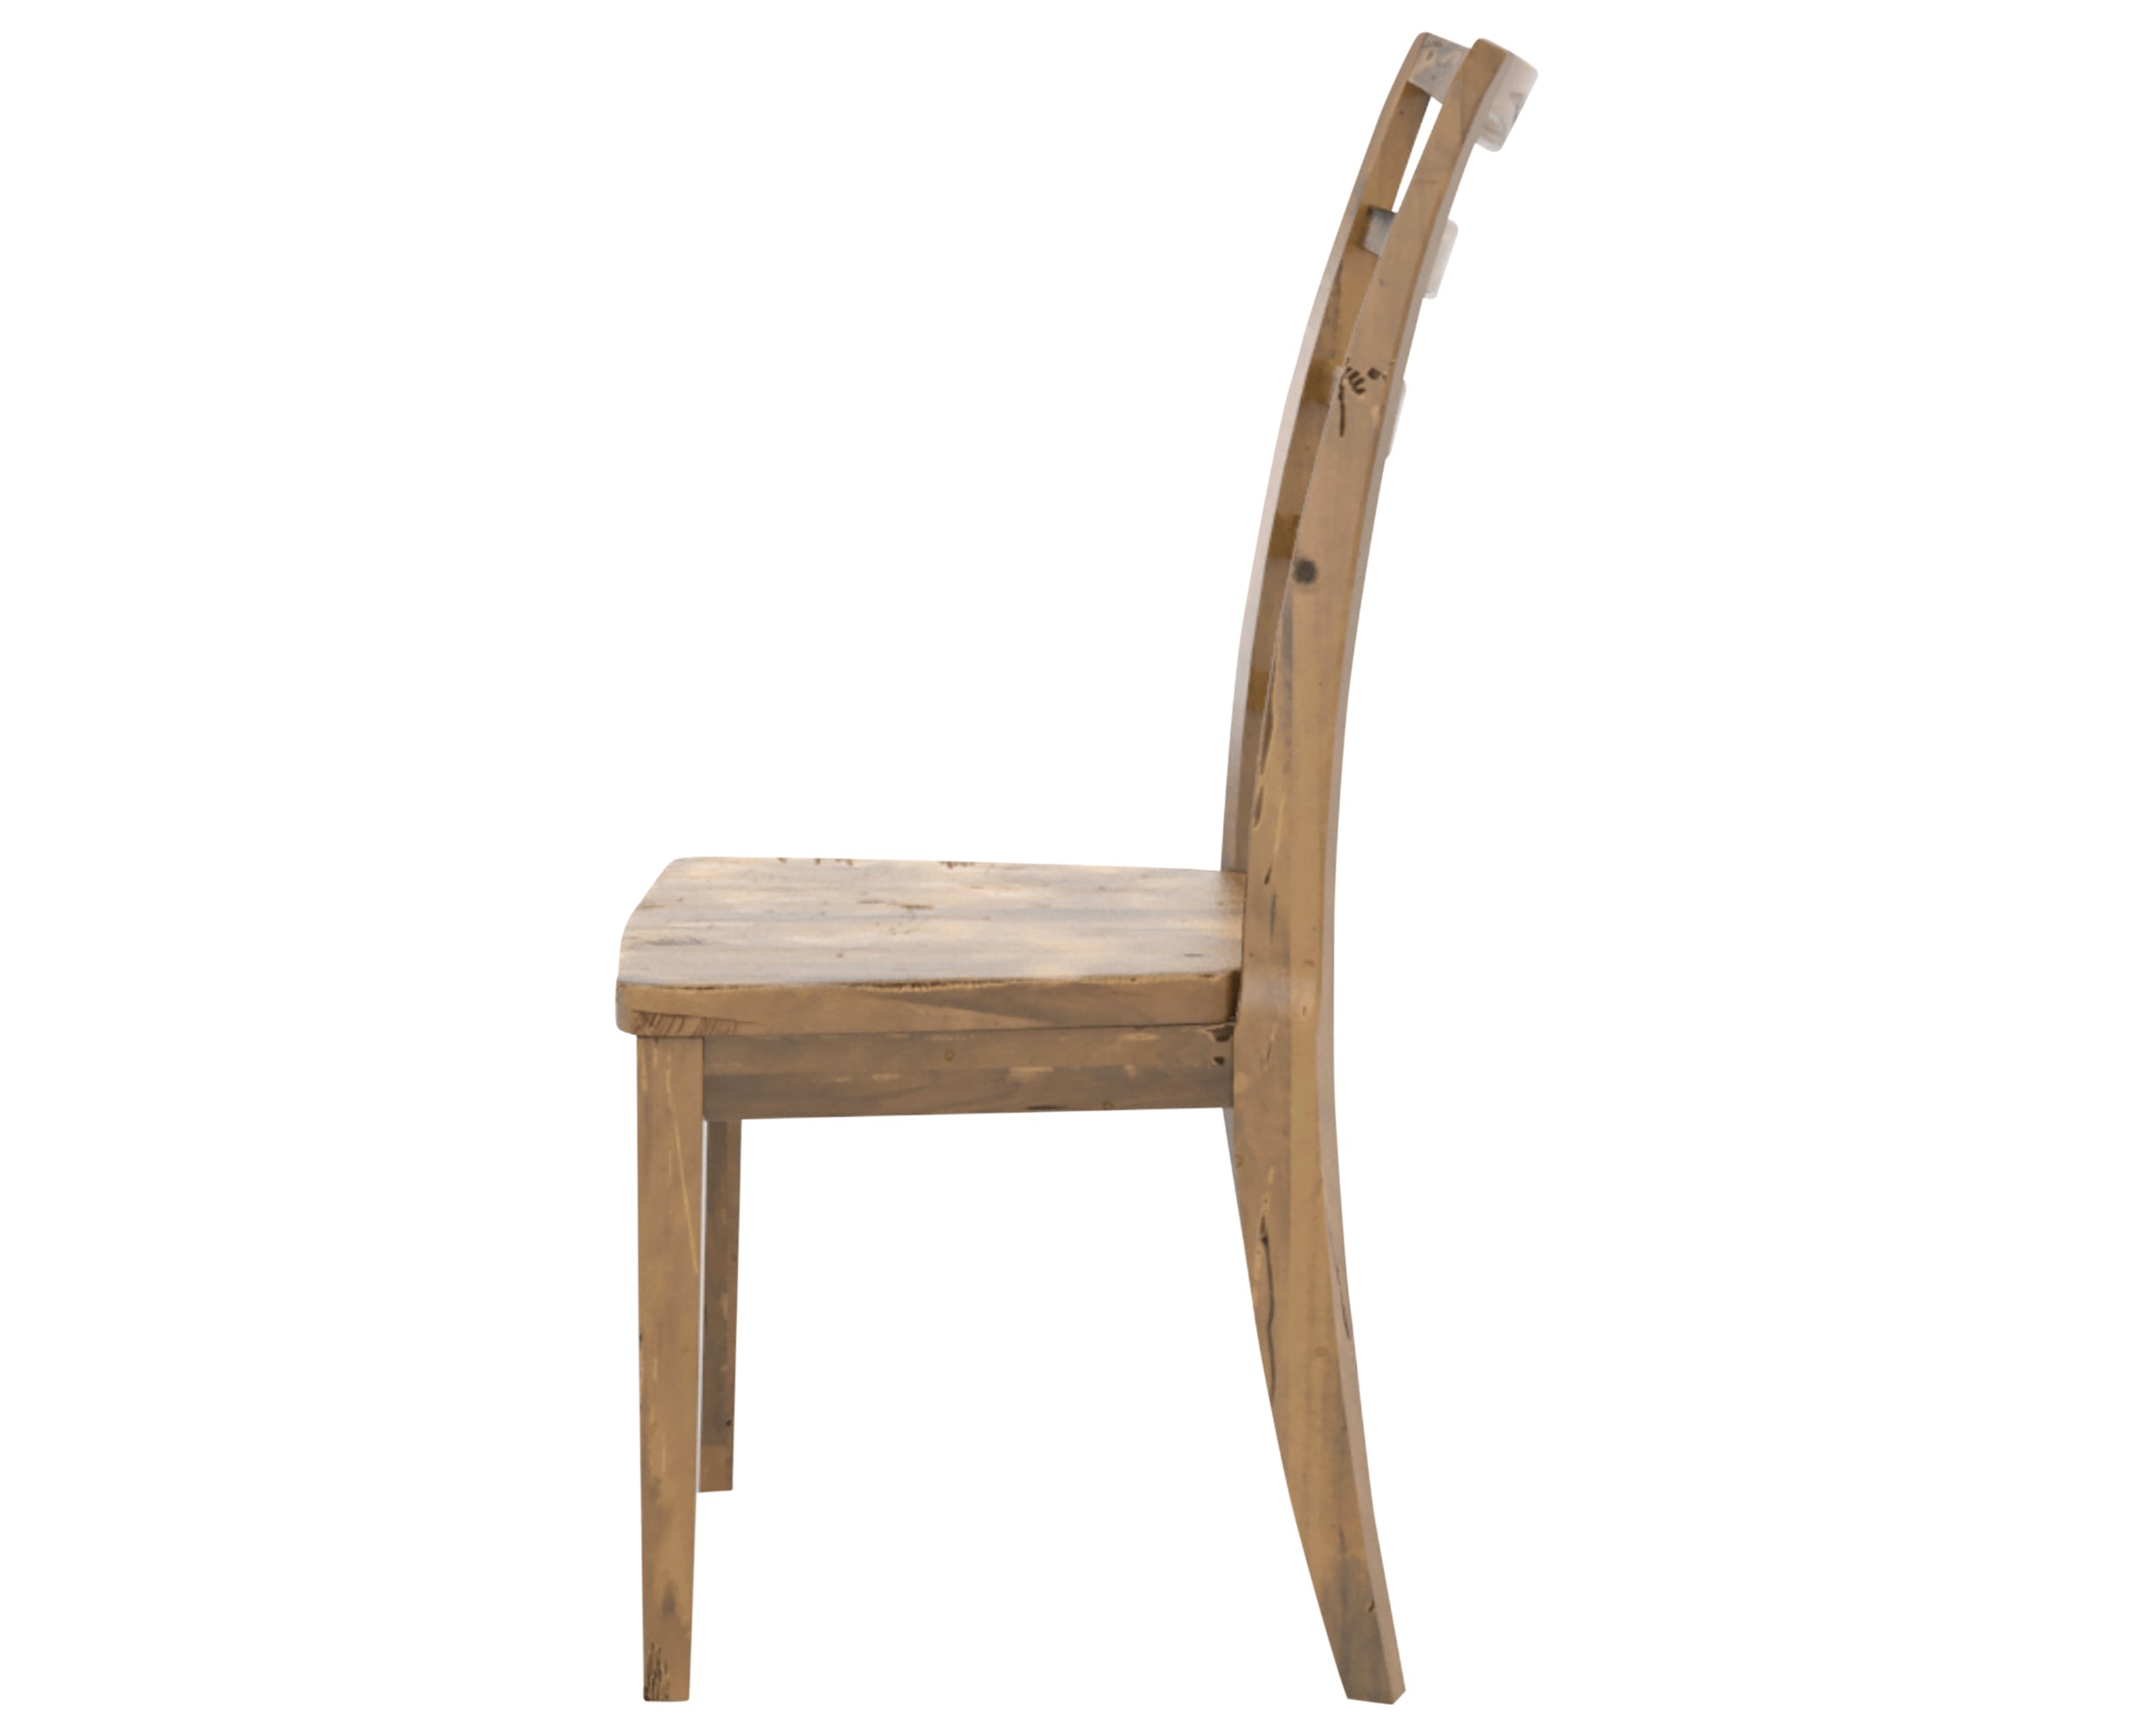 Oak Washed | Canadel Champlain Dining Chair 5185 | Valley Ridge Furniture